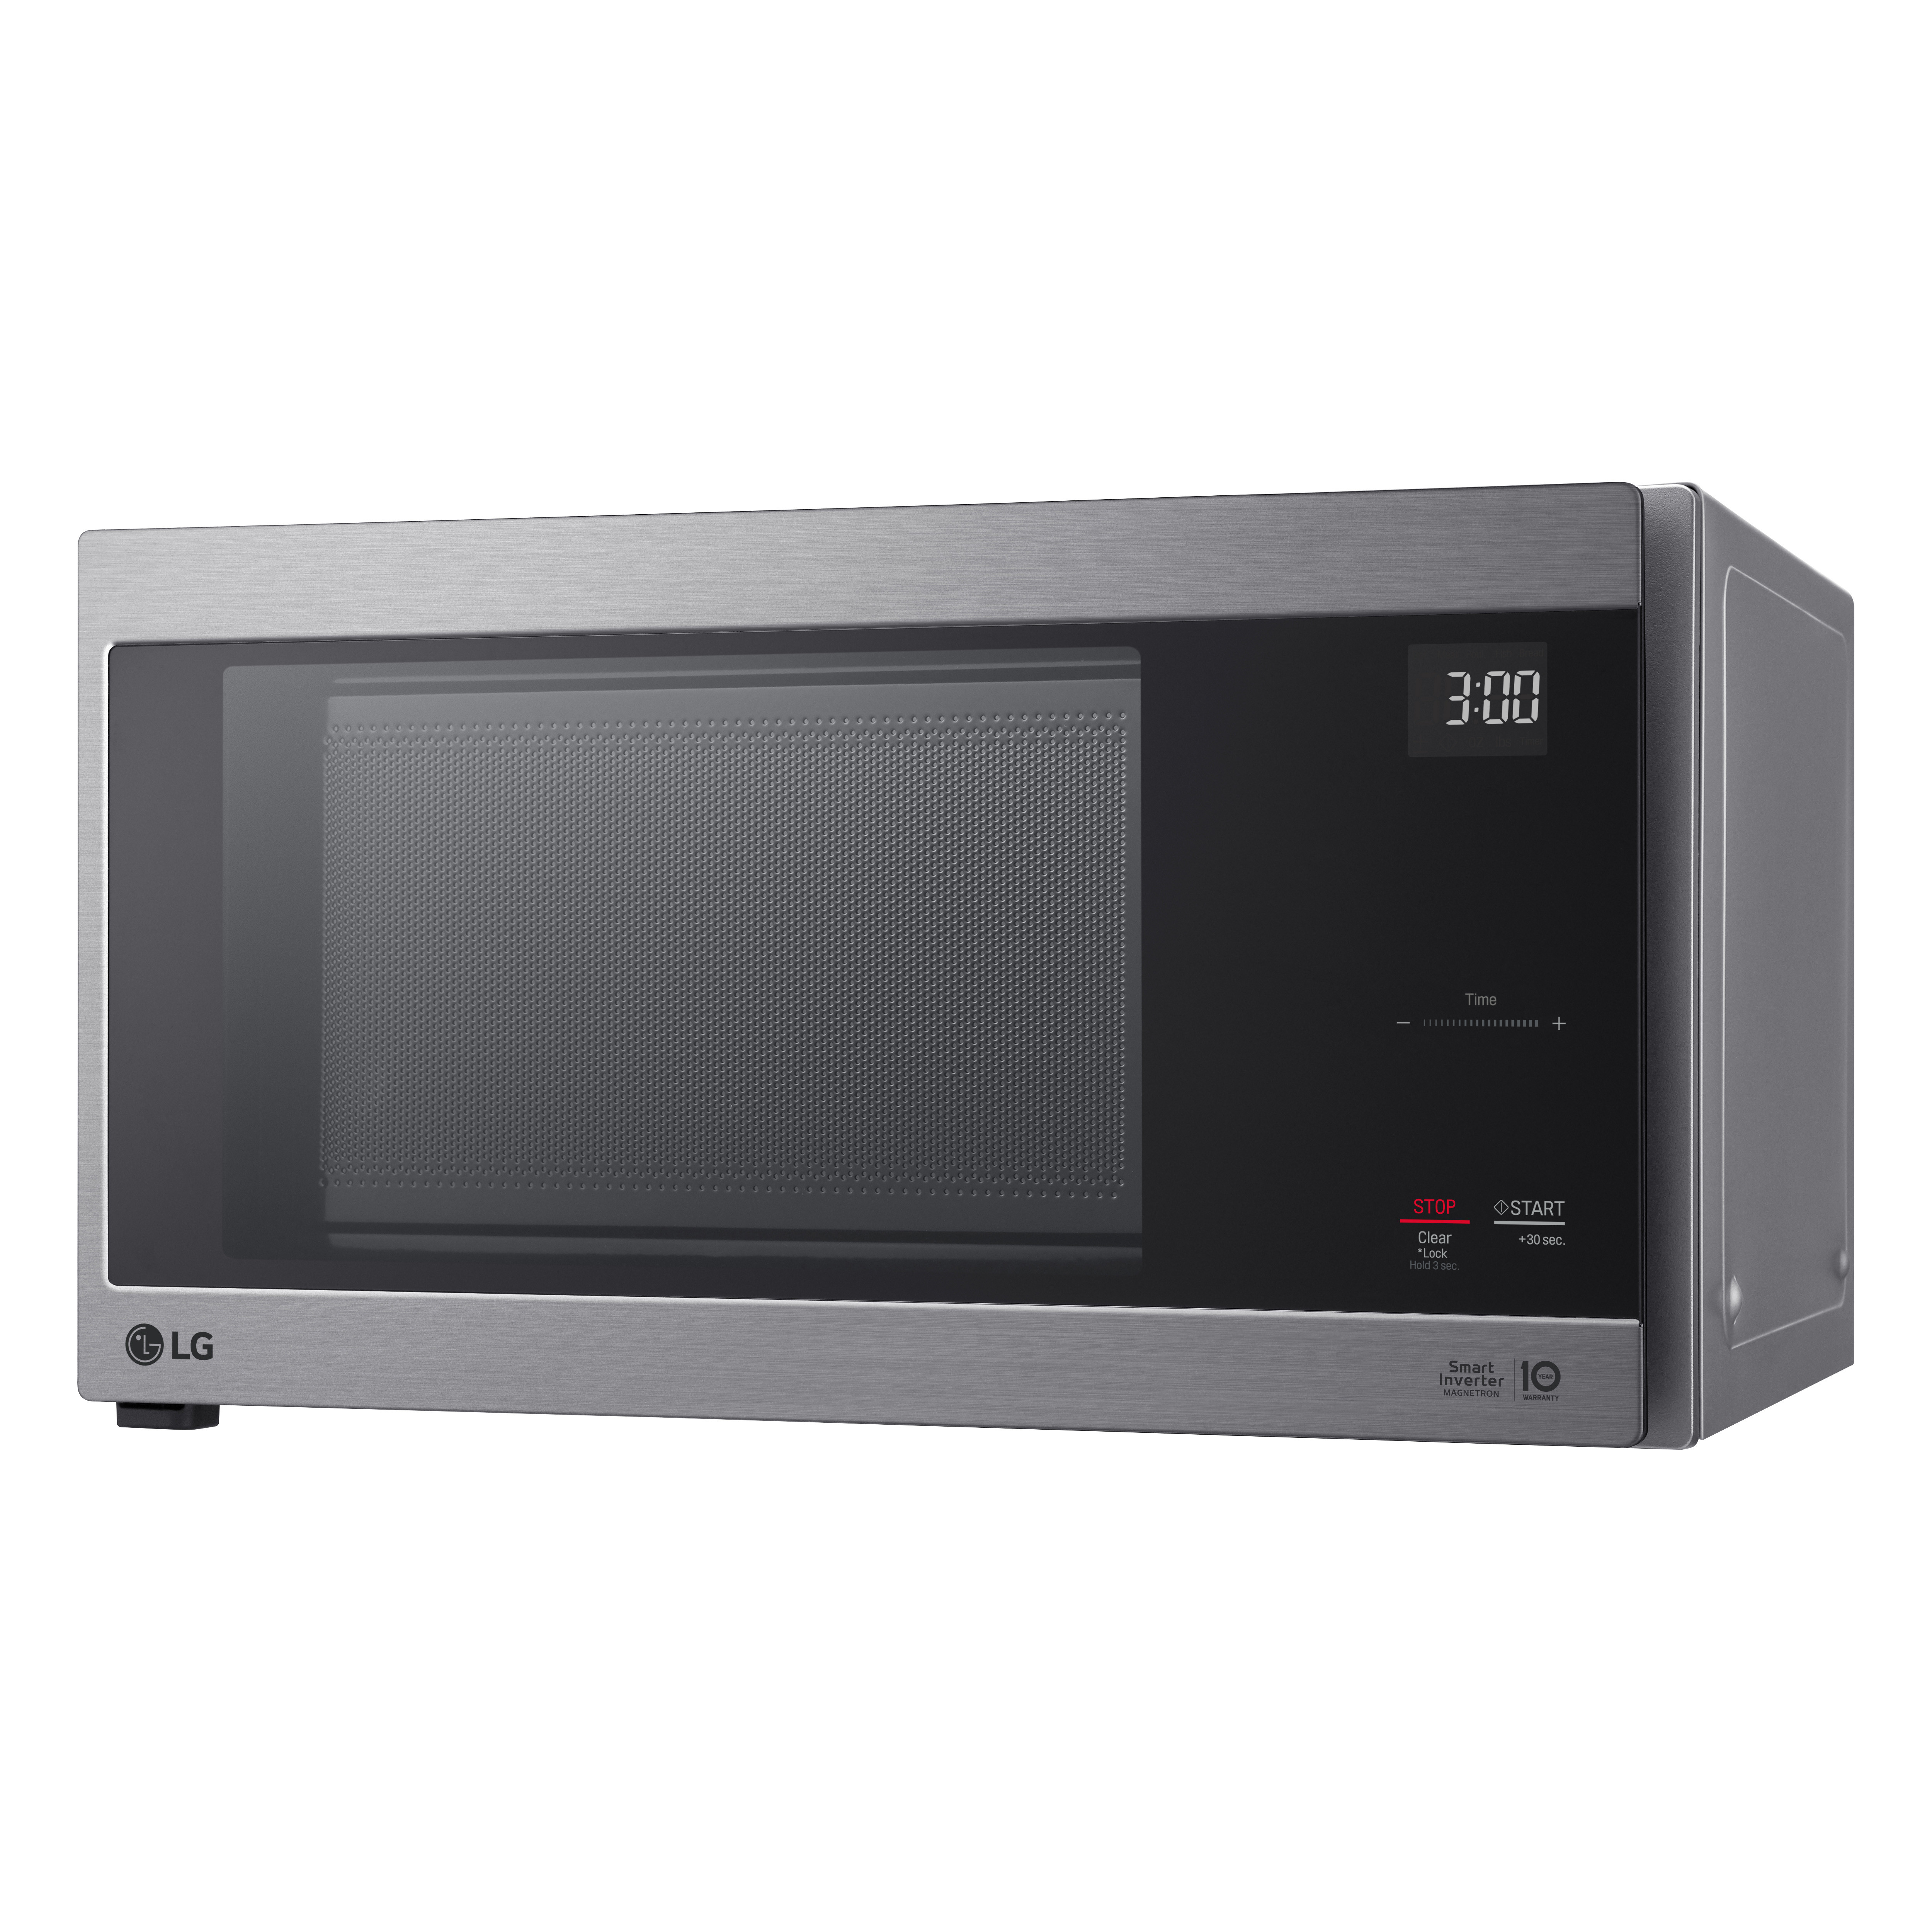 LG Neo Chef 1.5 cu. ft. Countertop Microwave Oven, 1200 Watts, Stainless Steel - image 3 of 15